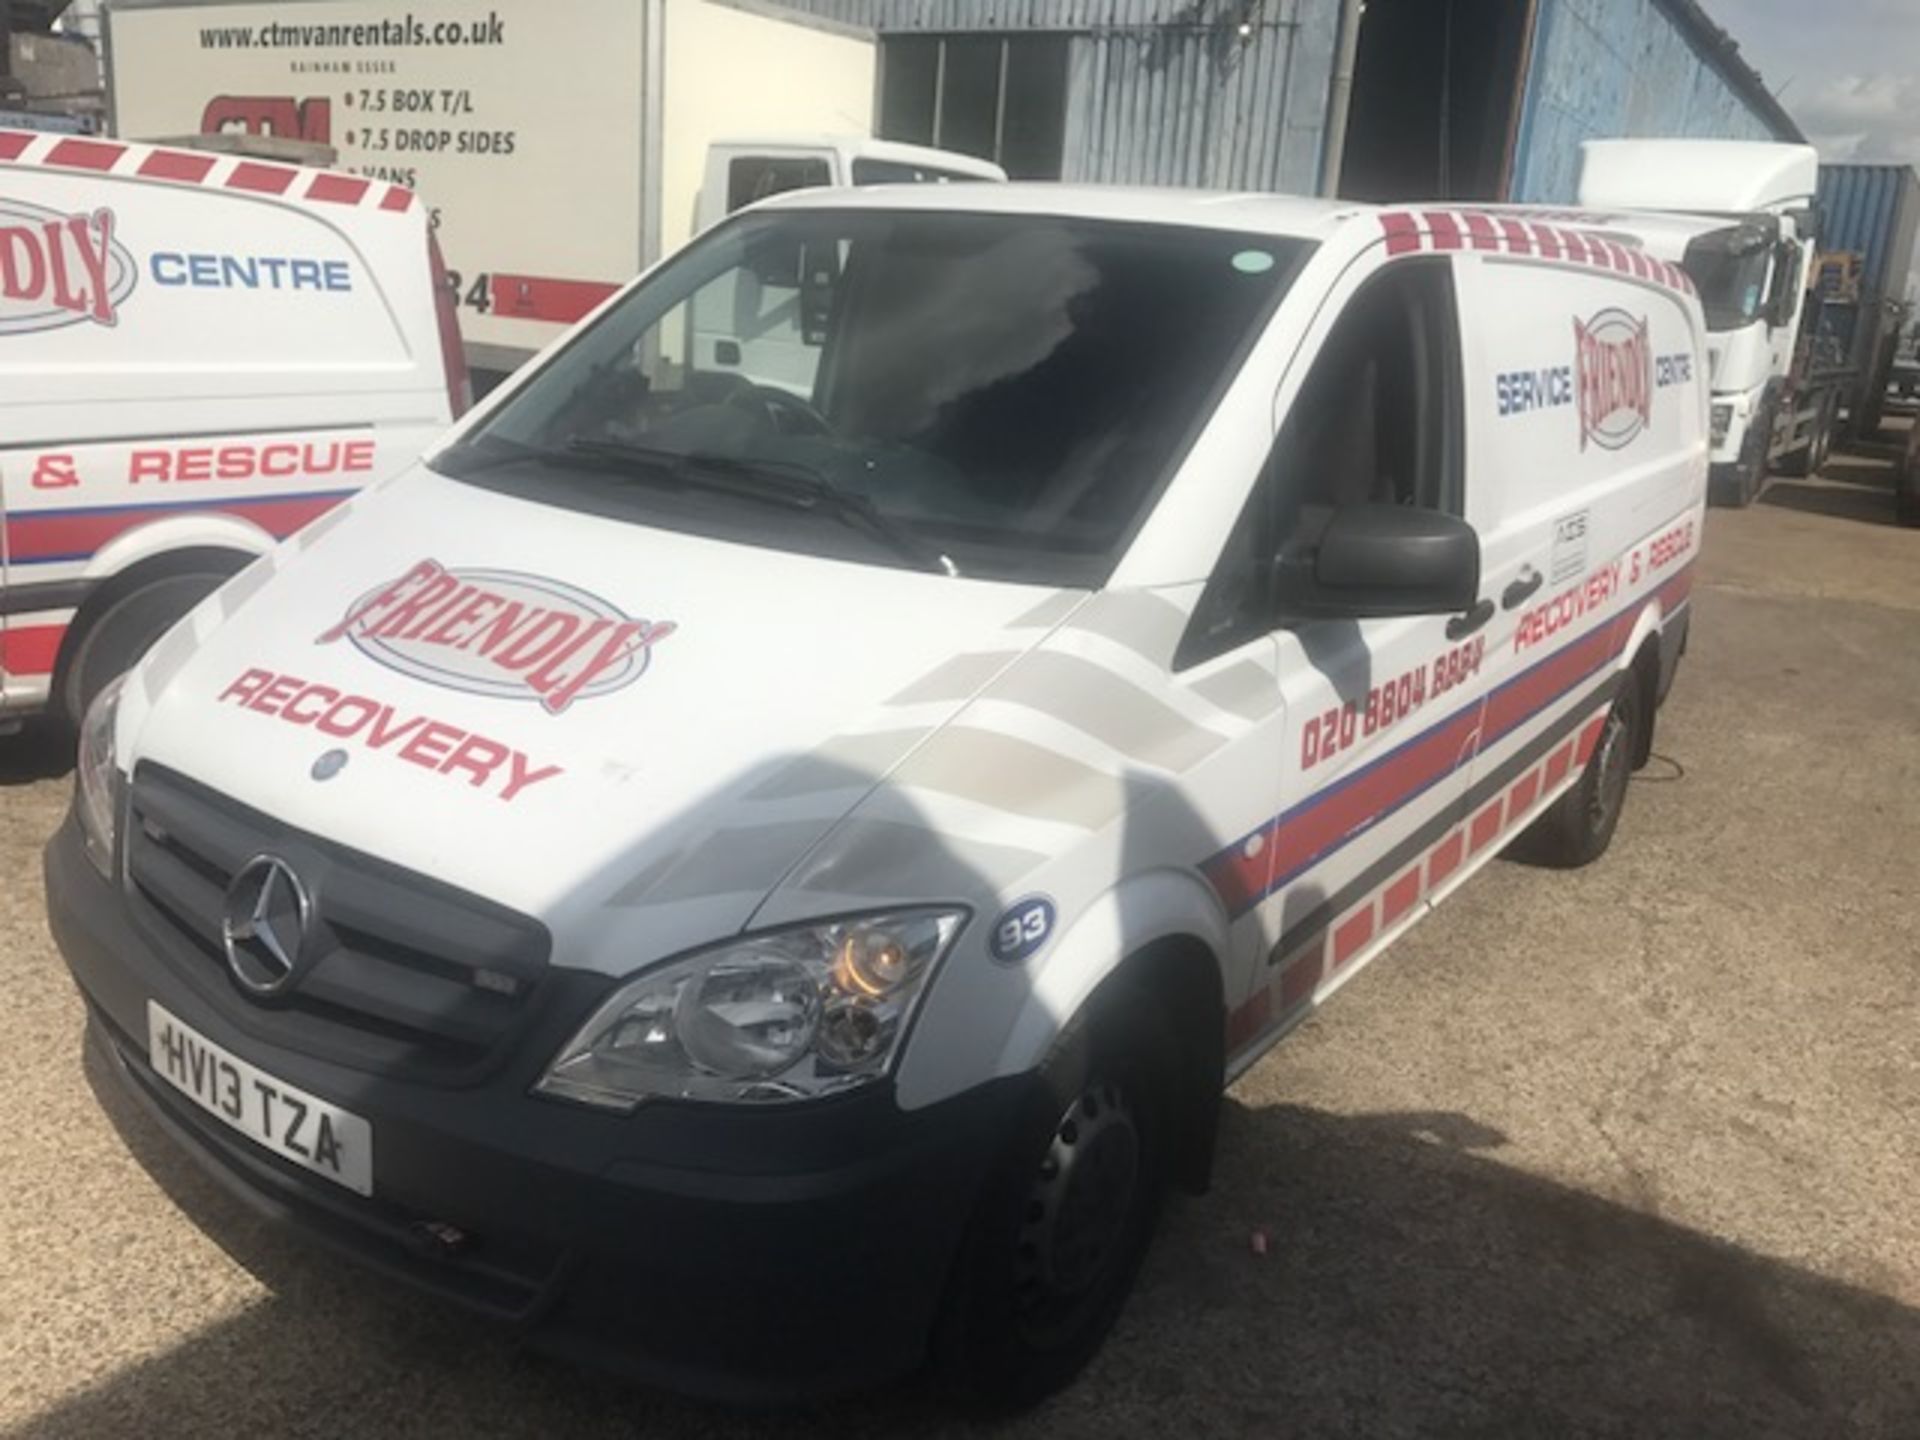 2013 Mercedes Vito 113 CDi recovery and rescue panel van complete with Intertrade Engineering - Image 2 of 16